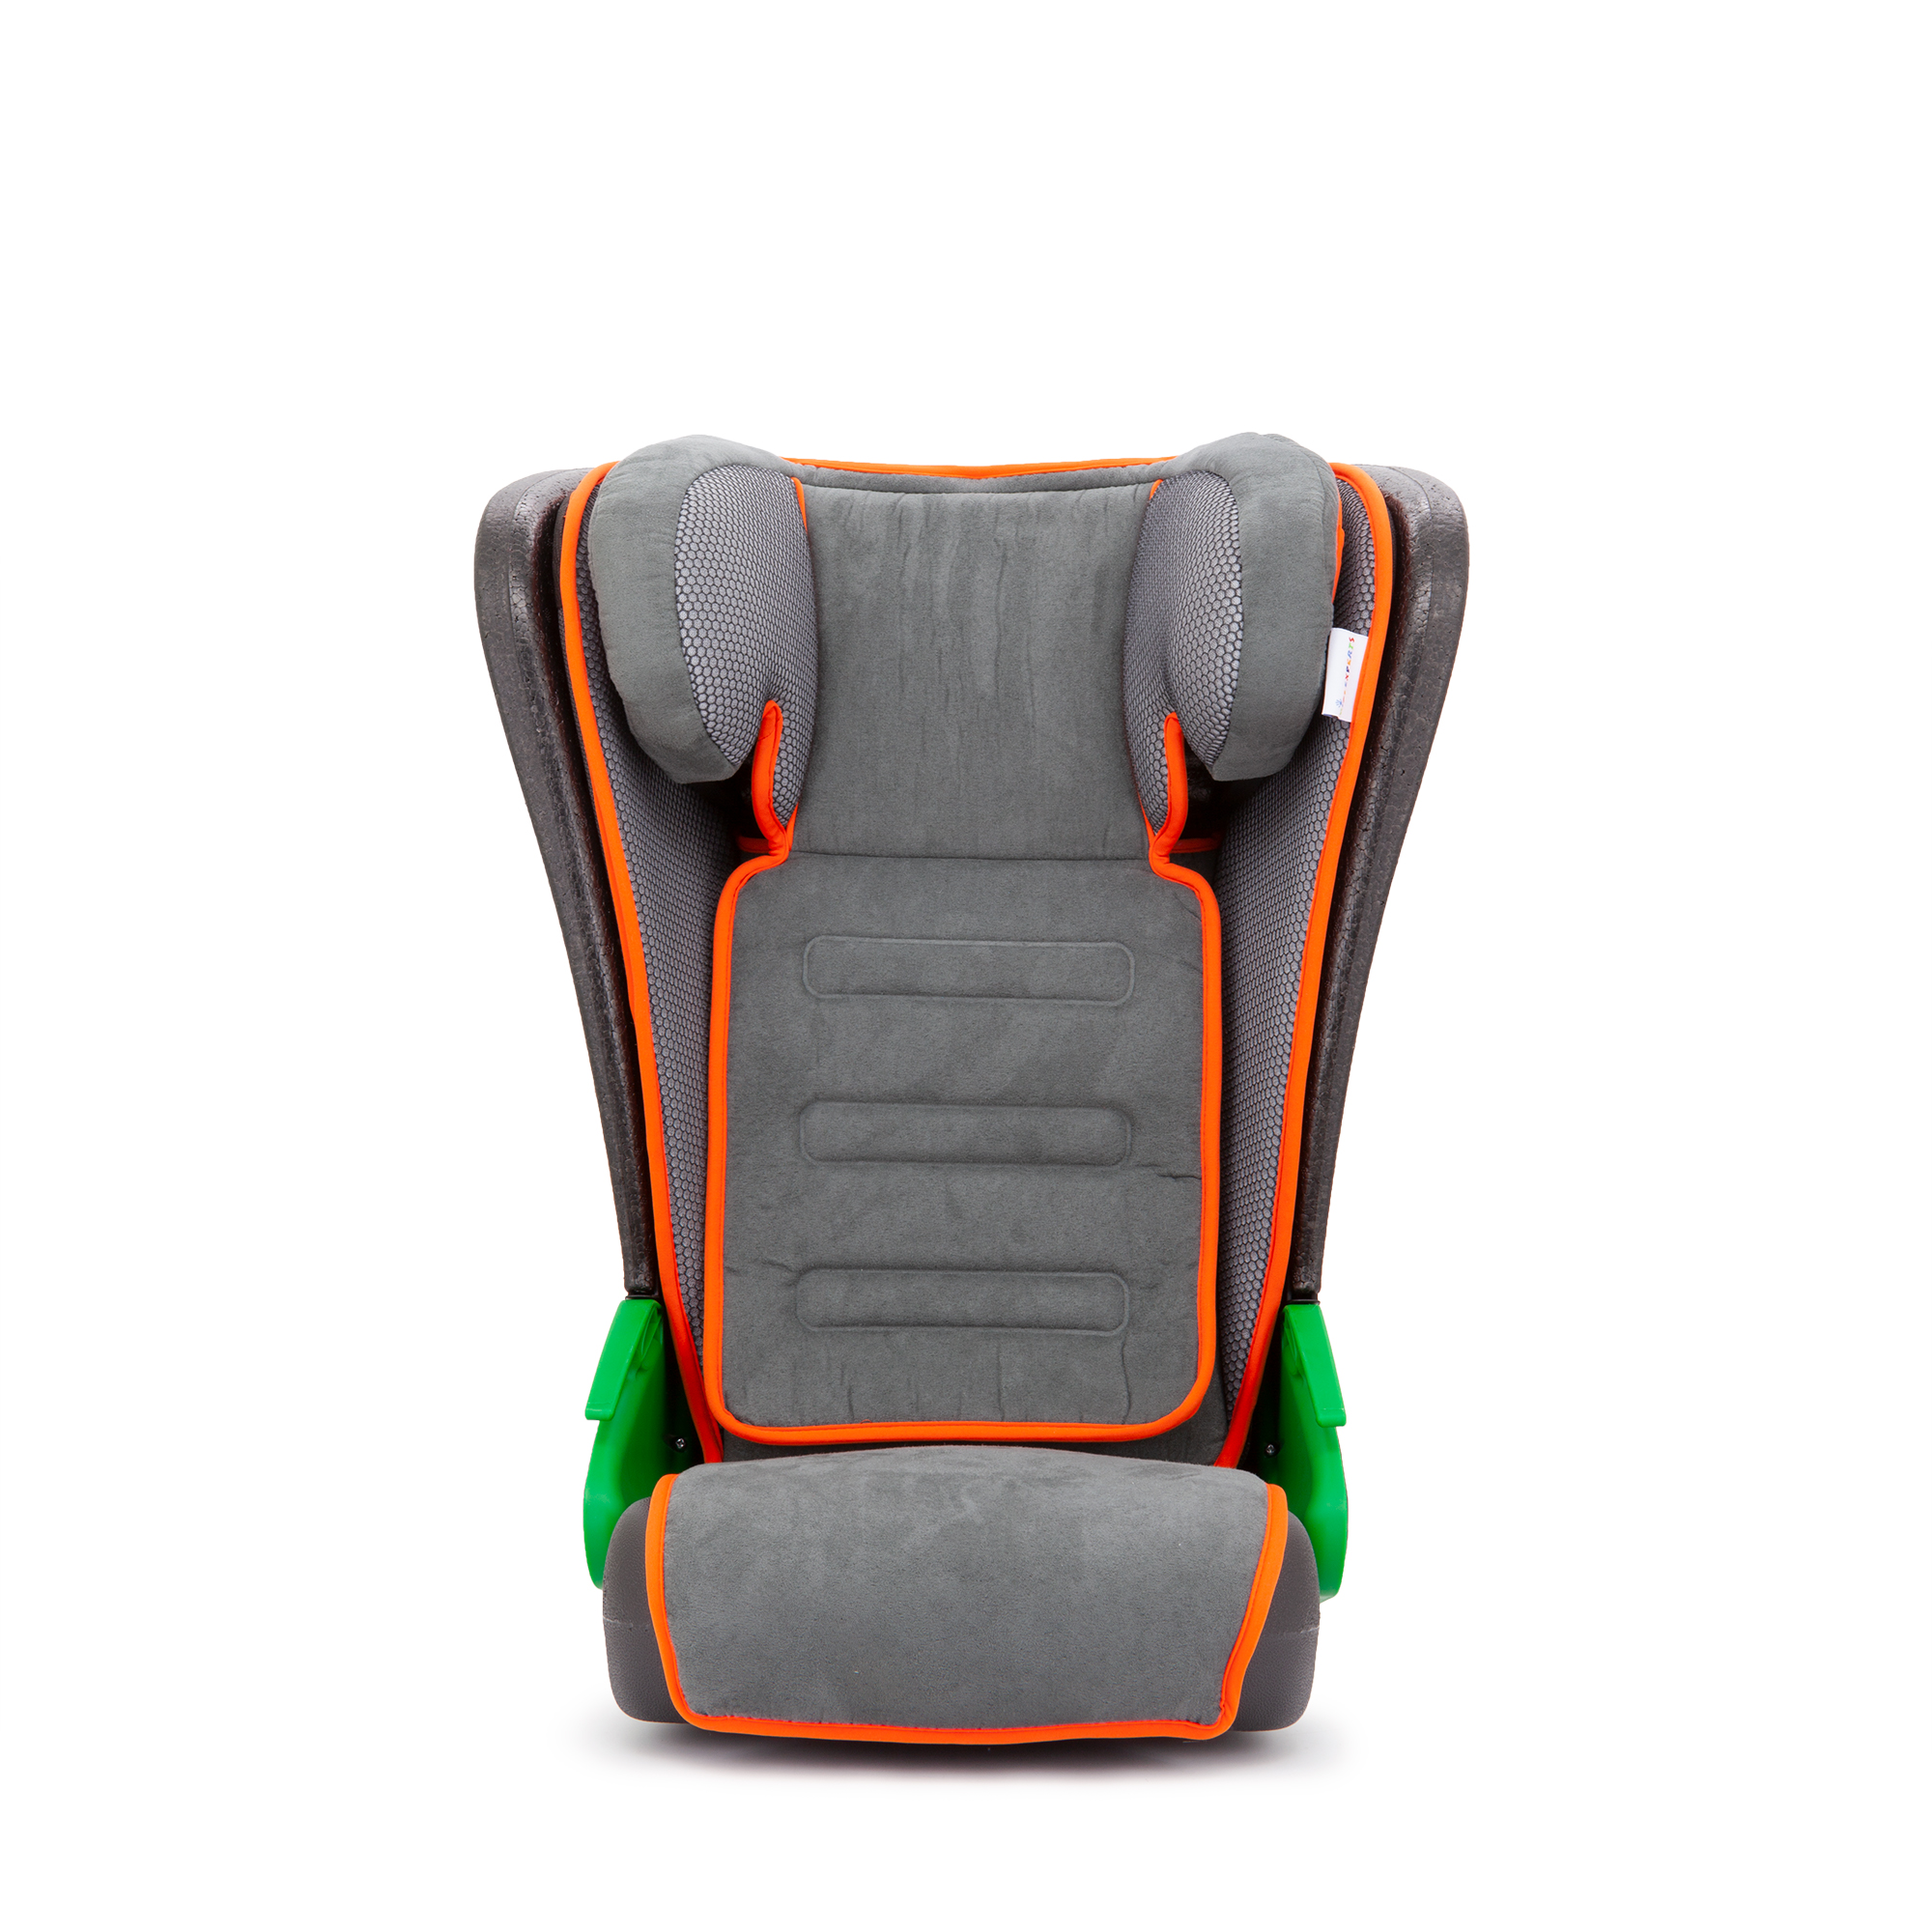 Large Upright Child Car Seat for 4 Year Old